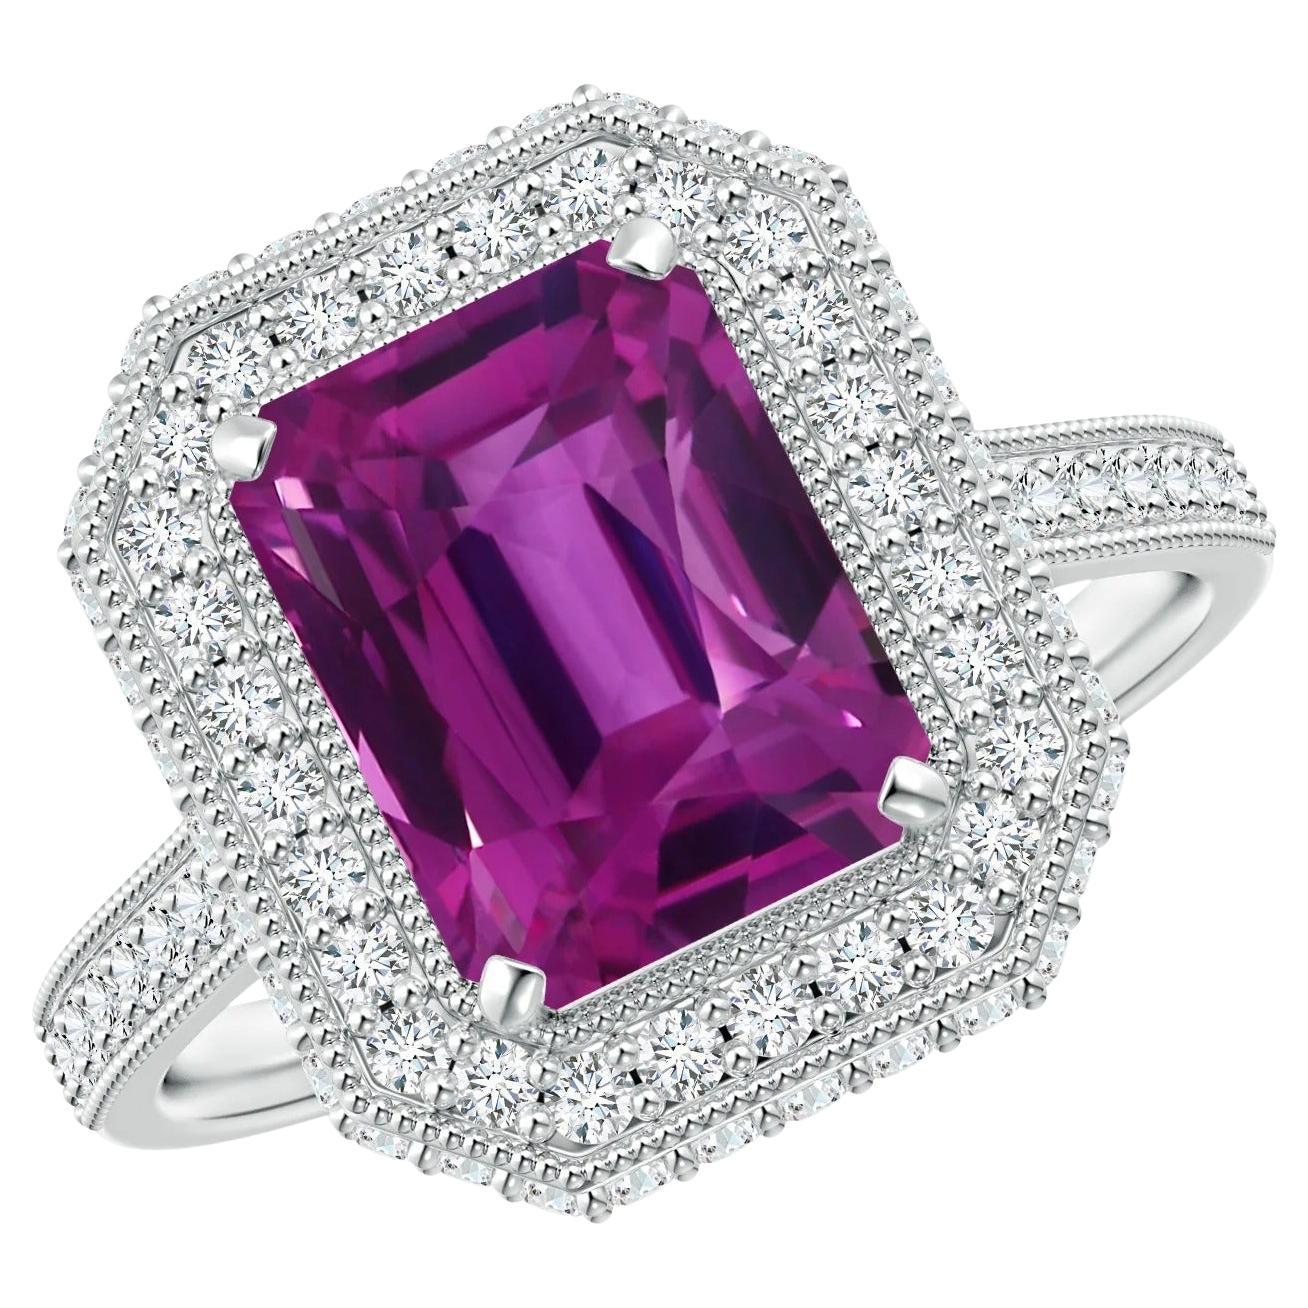 For Sale:  Angara Gia Certified Natural Emerald Cut Pink Sapphire Halo Ring in Platinum